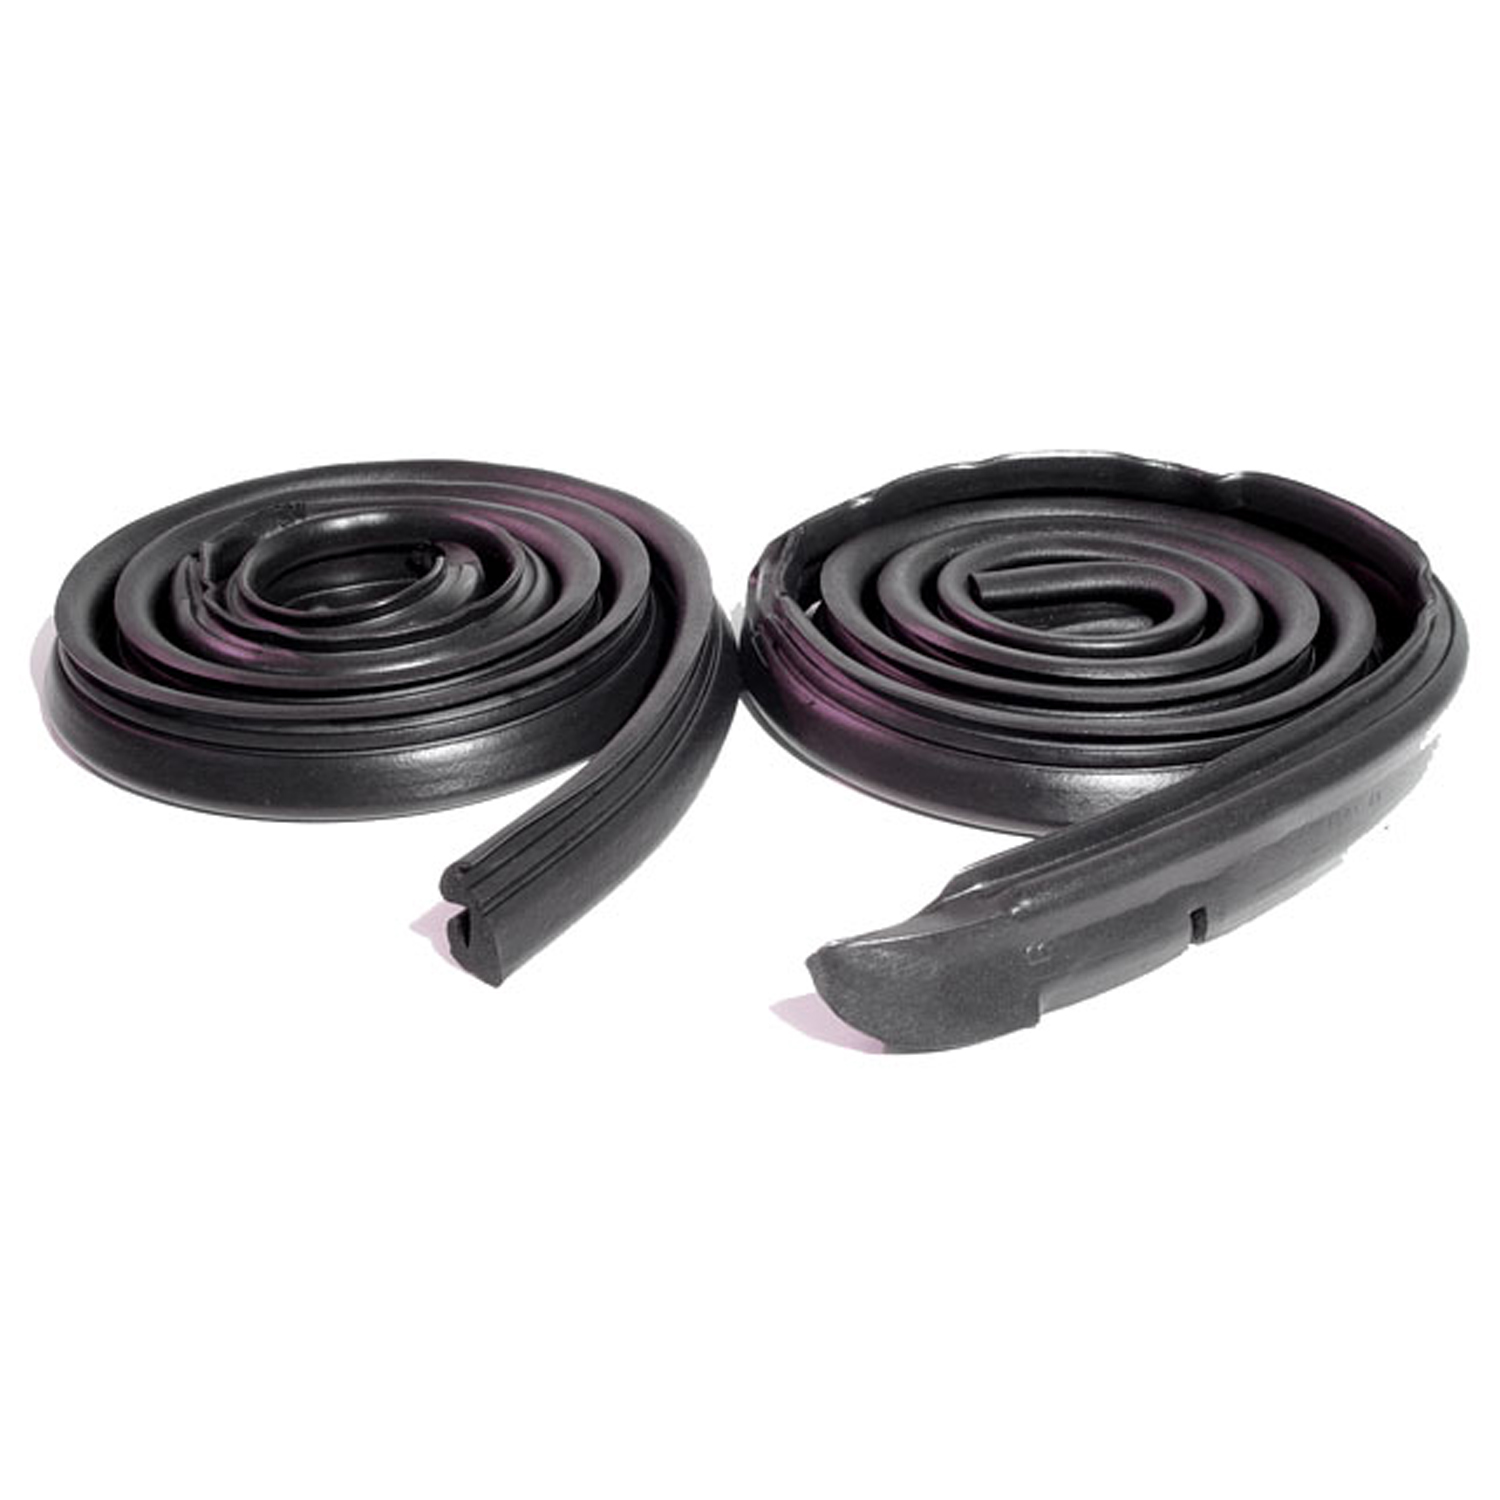 1965 Plymouth Fury Molded Roof Rail Seals, for 2-Door Hardtop without Post-RR 4001-C